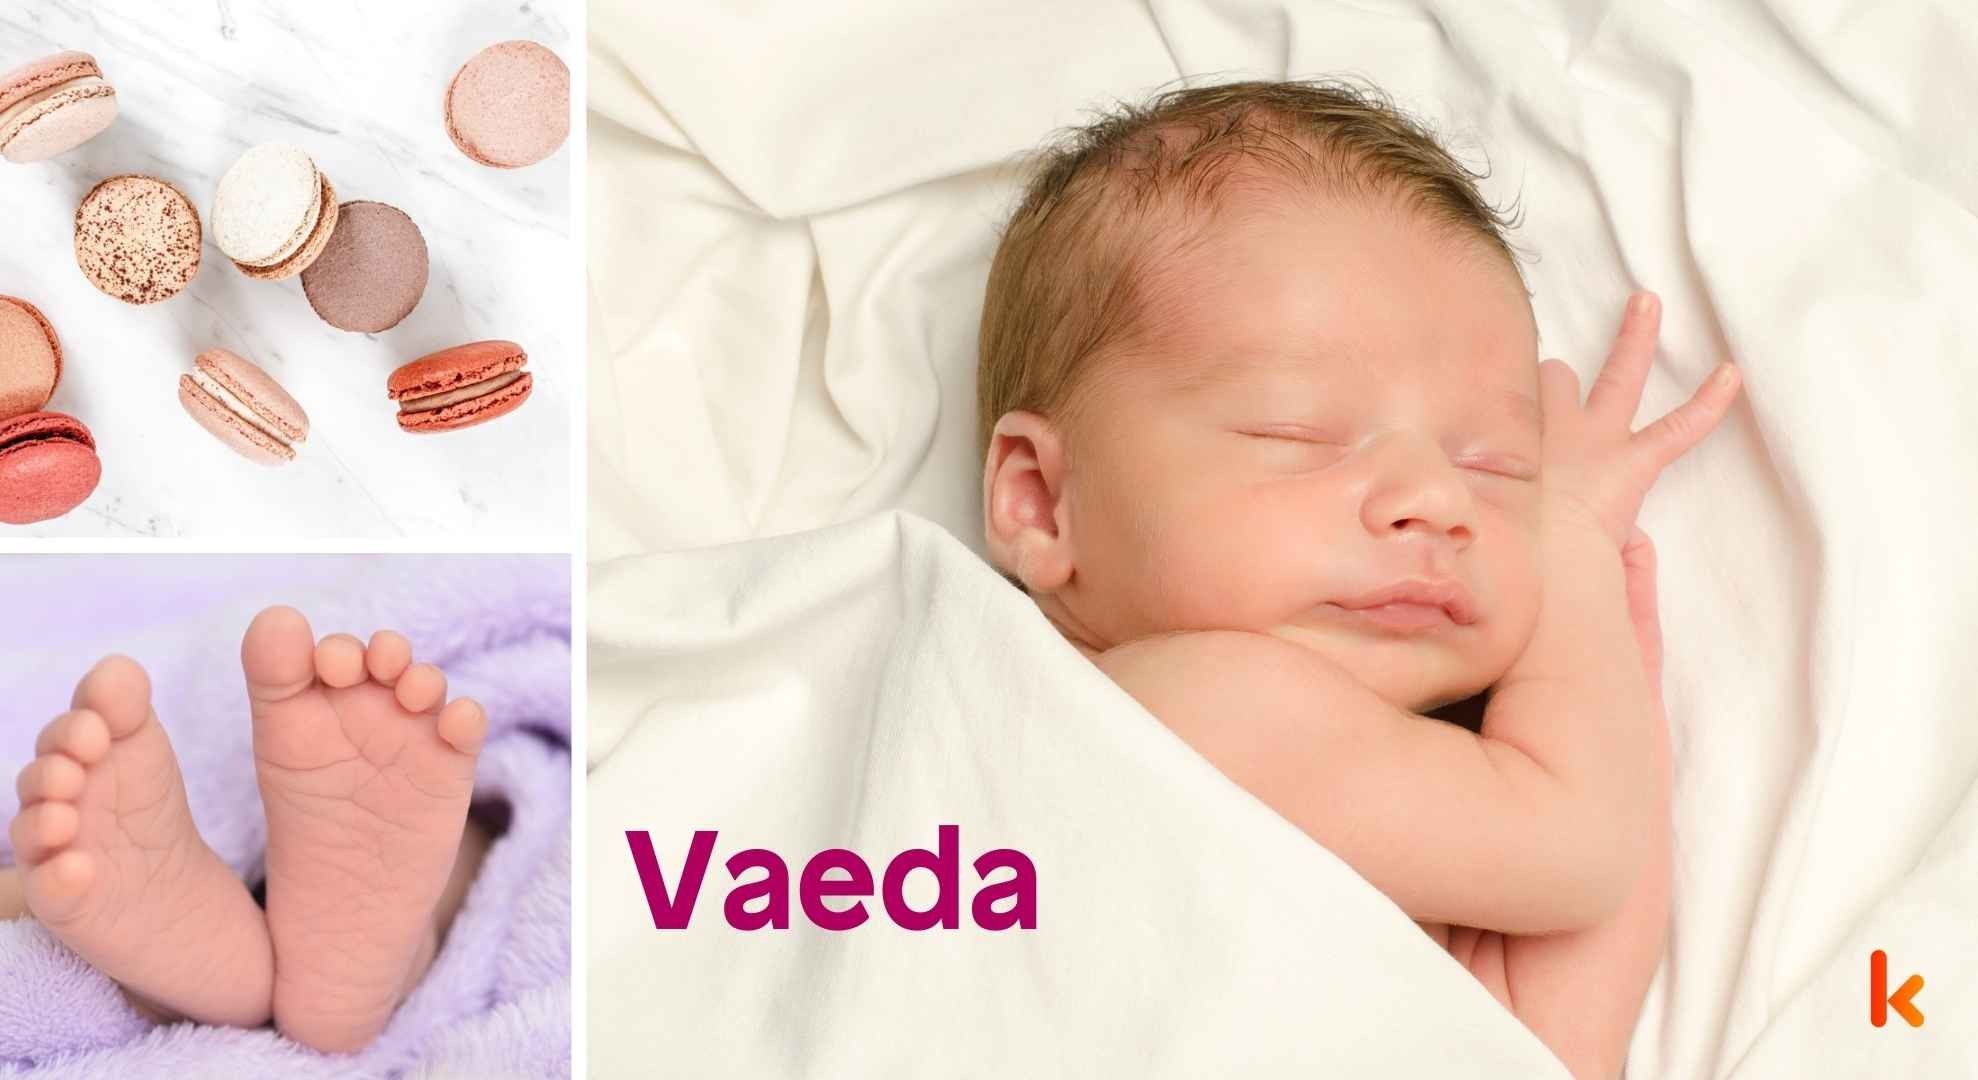 Meaning of the name Vaeda